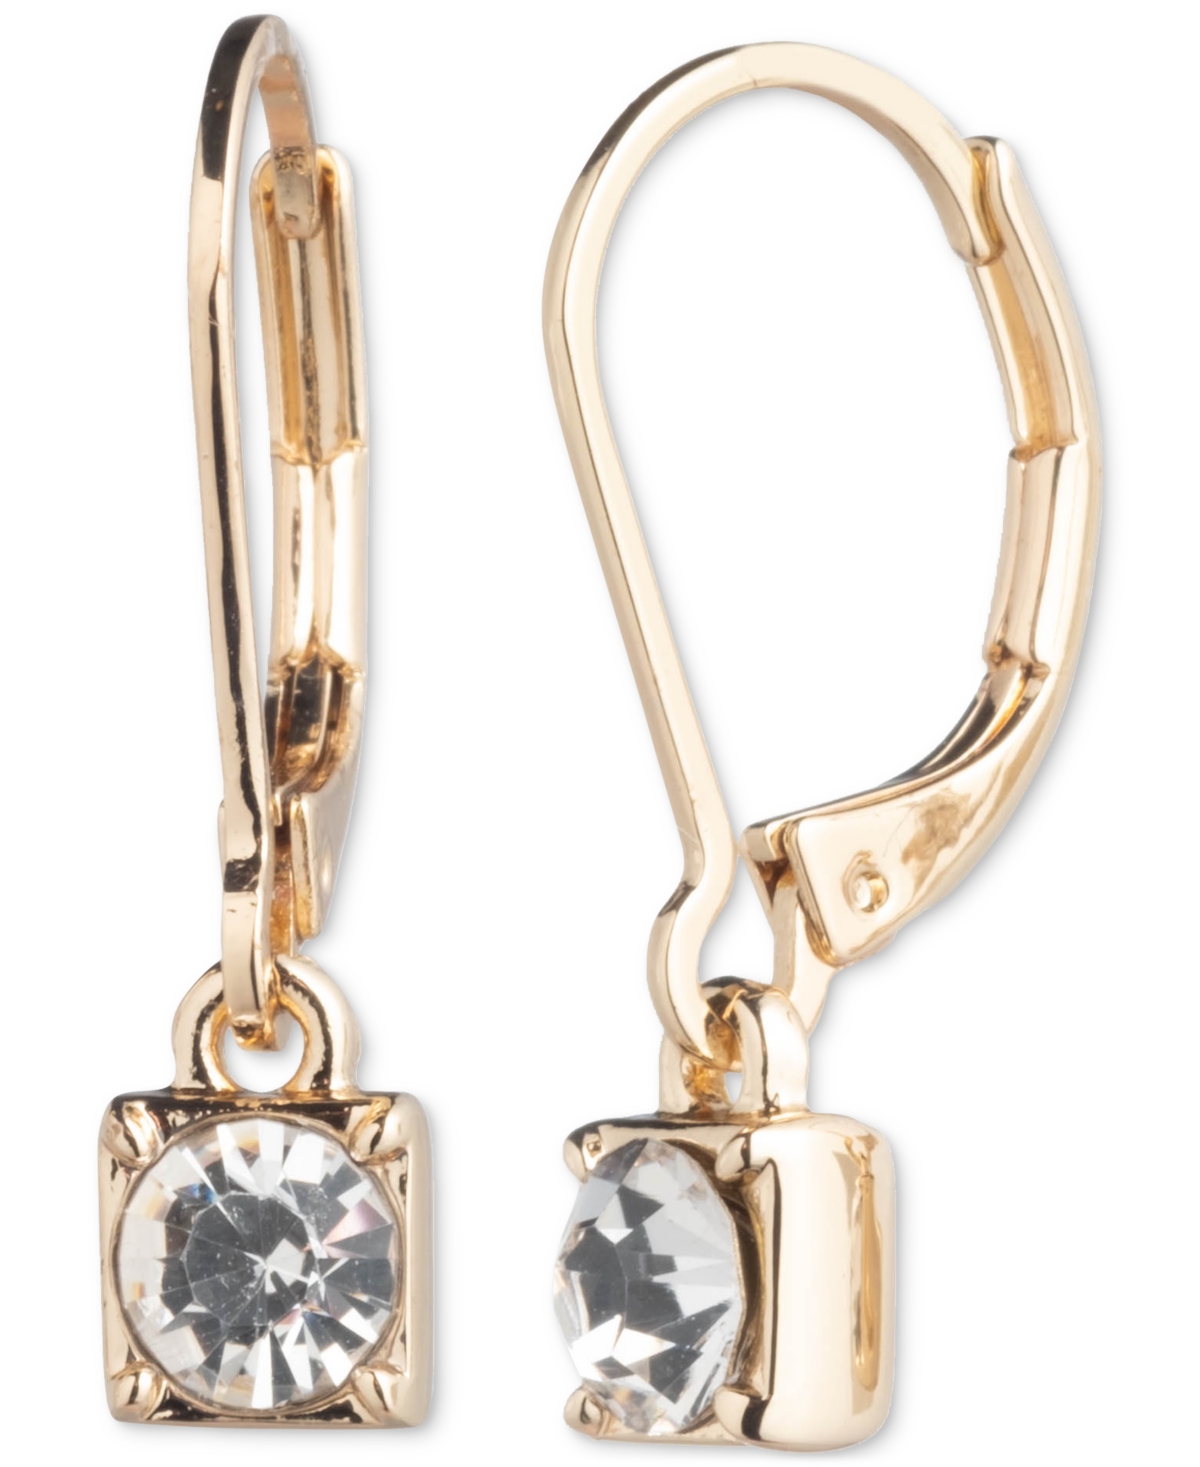 Gold-Tone Crystal Drop Earrings - Crystal Wh